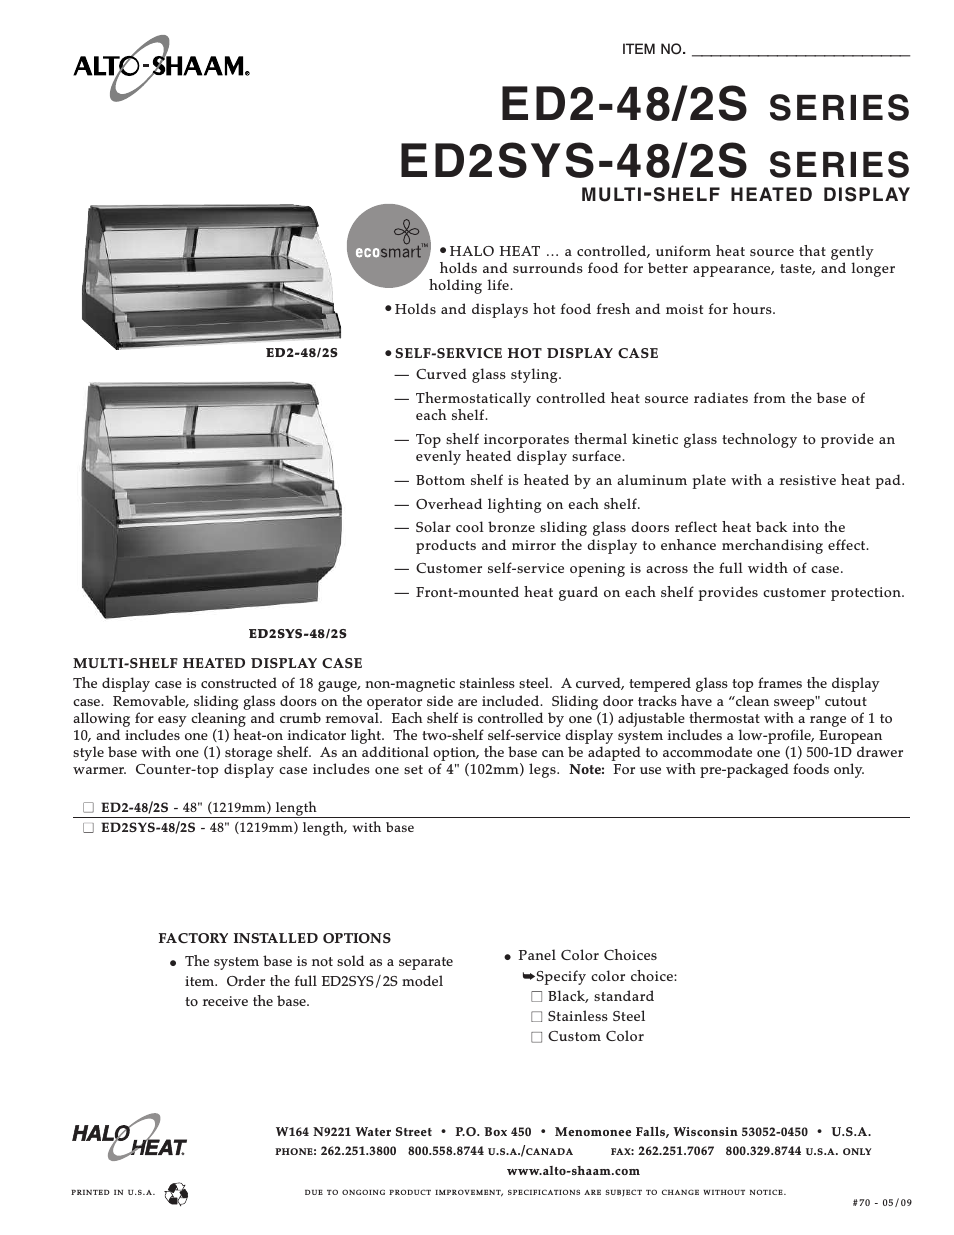 ED2SYS-2S